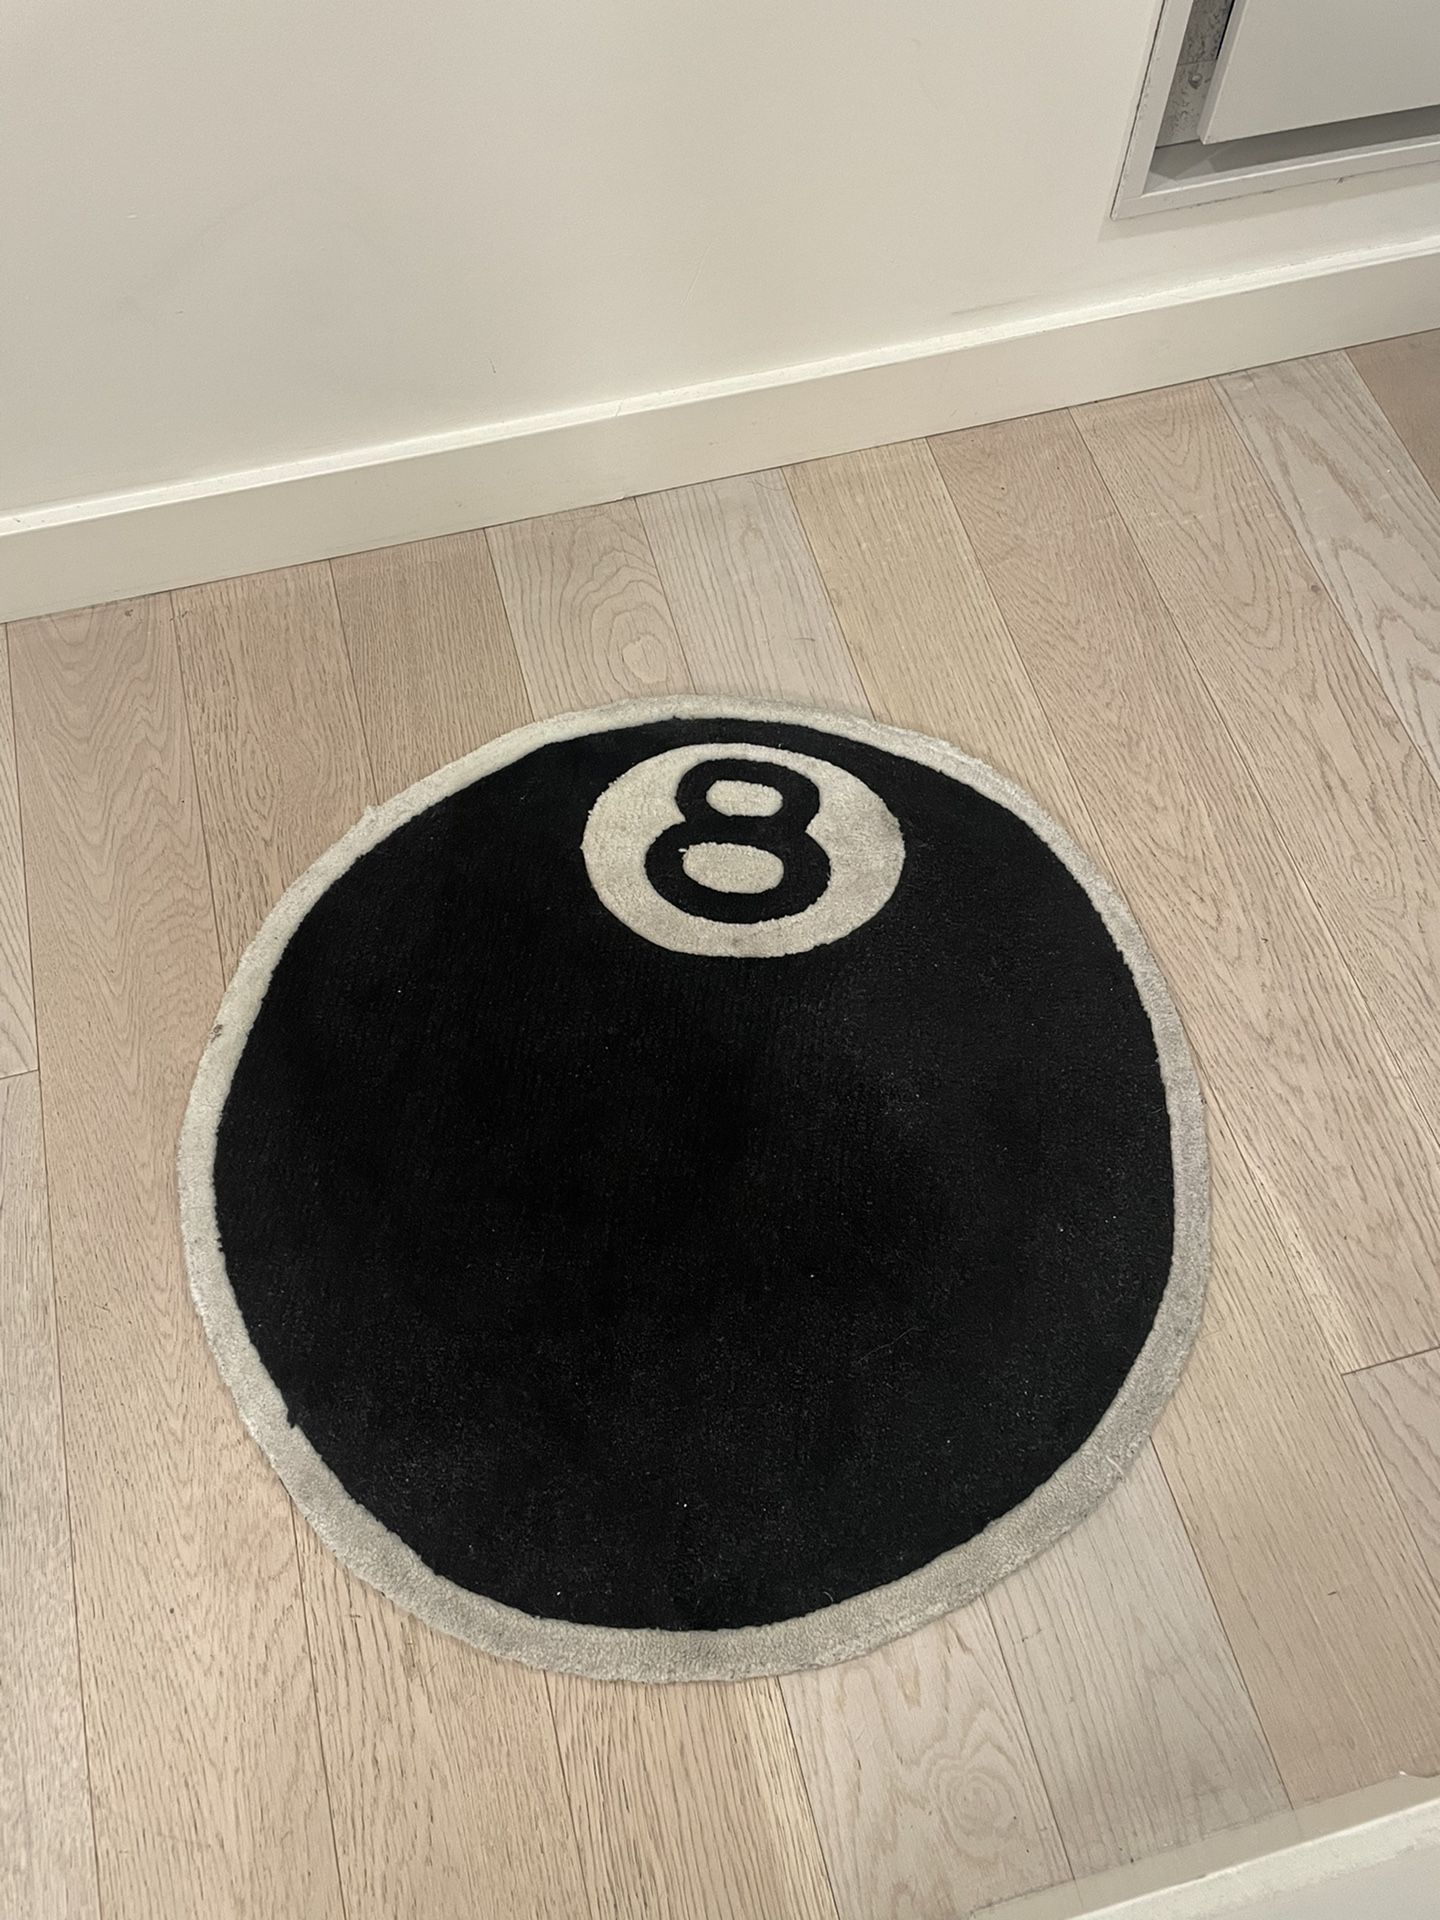 Stussy 8 Ball Rug for Sale in Los Angeles, CA - OfferUp